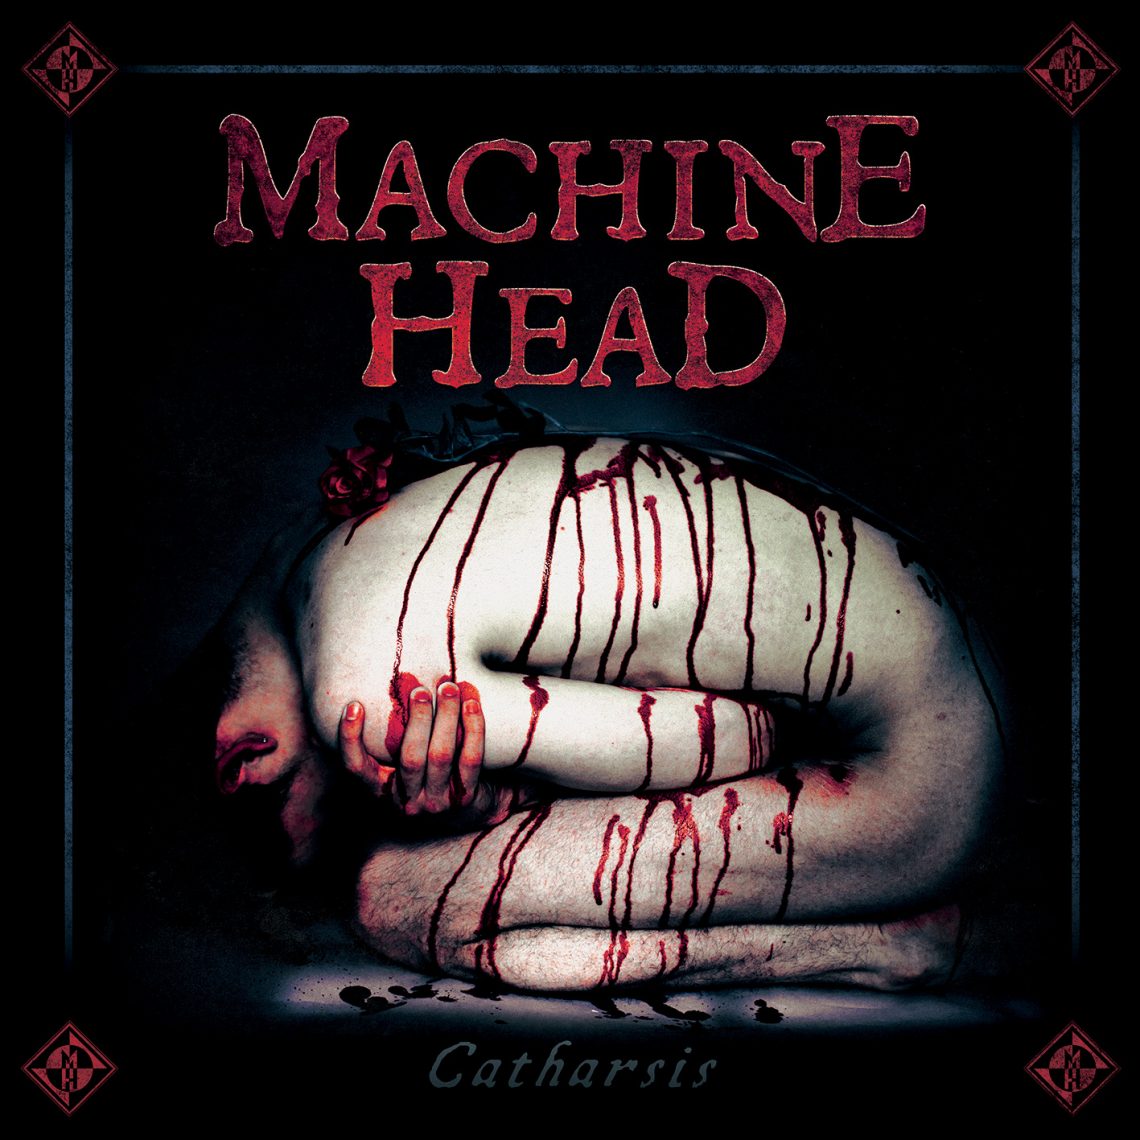 MACHINE HEAD reveal ‘Now We Die’ live video, ‘Catharsis’ special edition